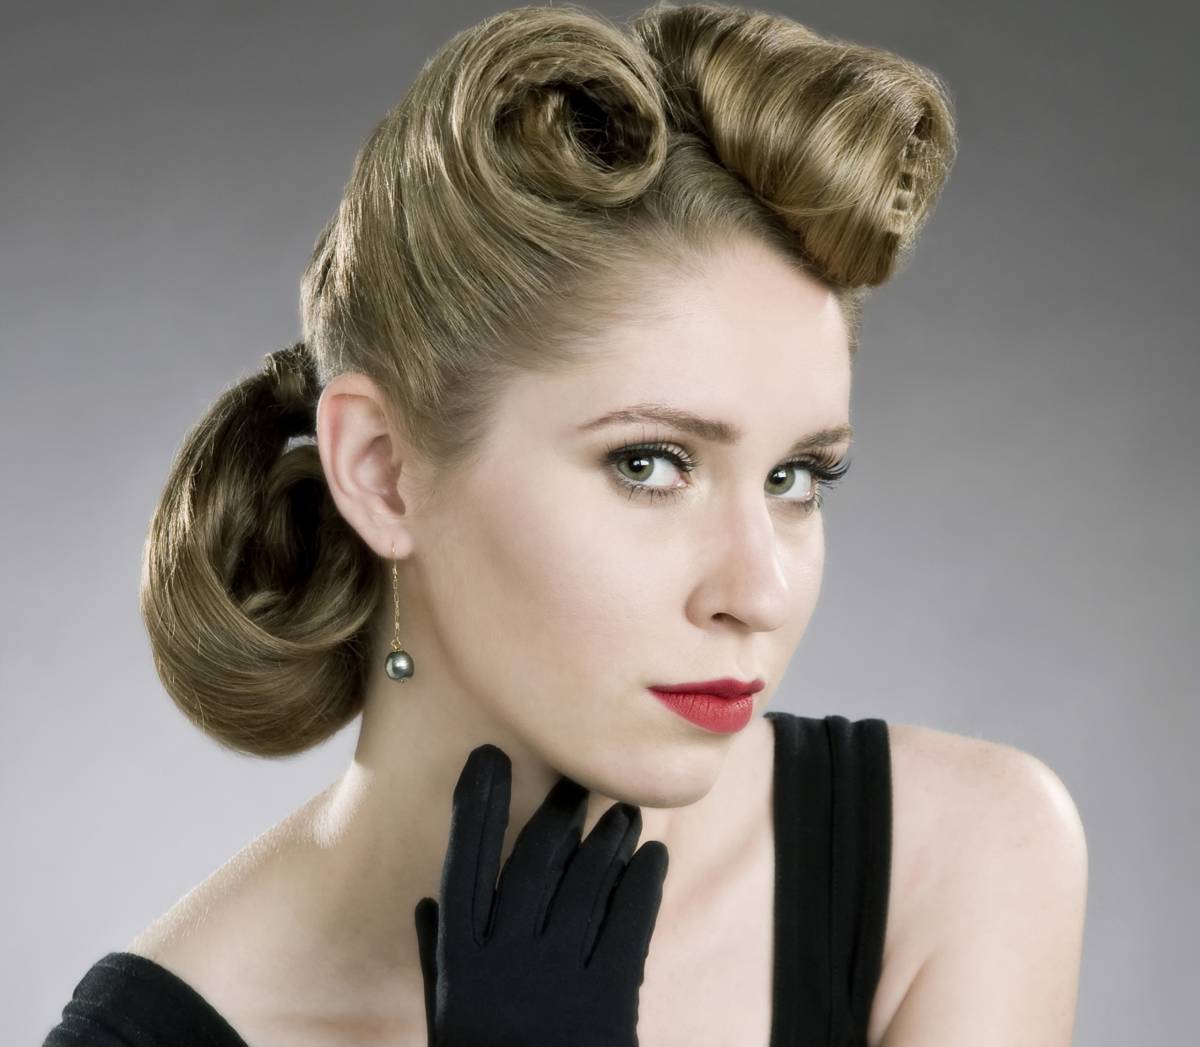 Hairstyles That Defined the Best of the 1950s - Hair ...